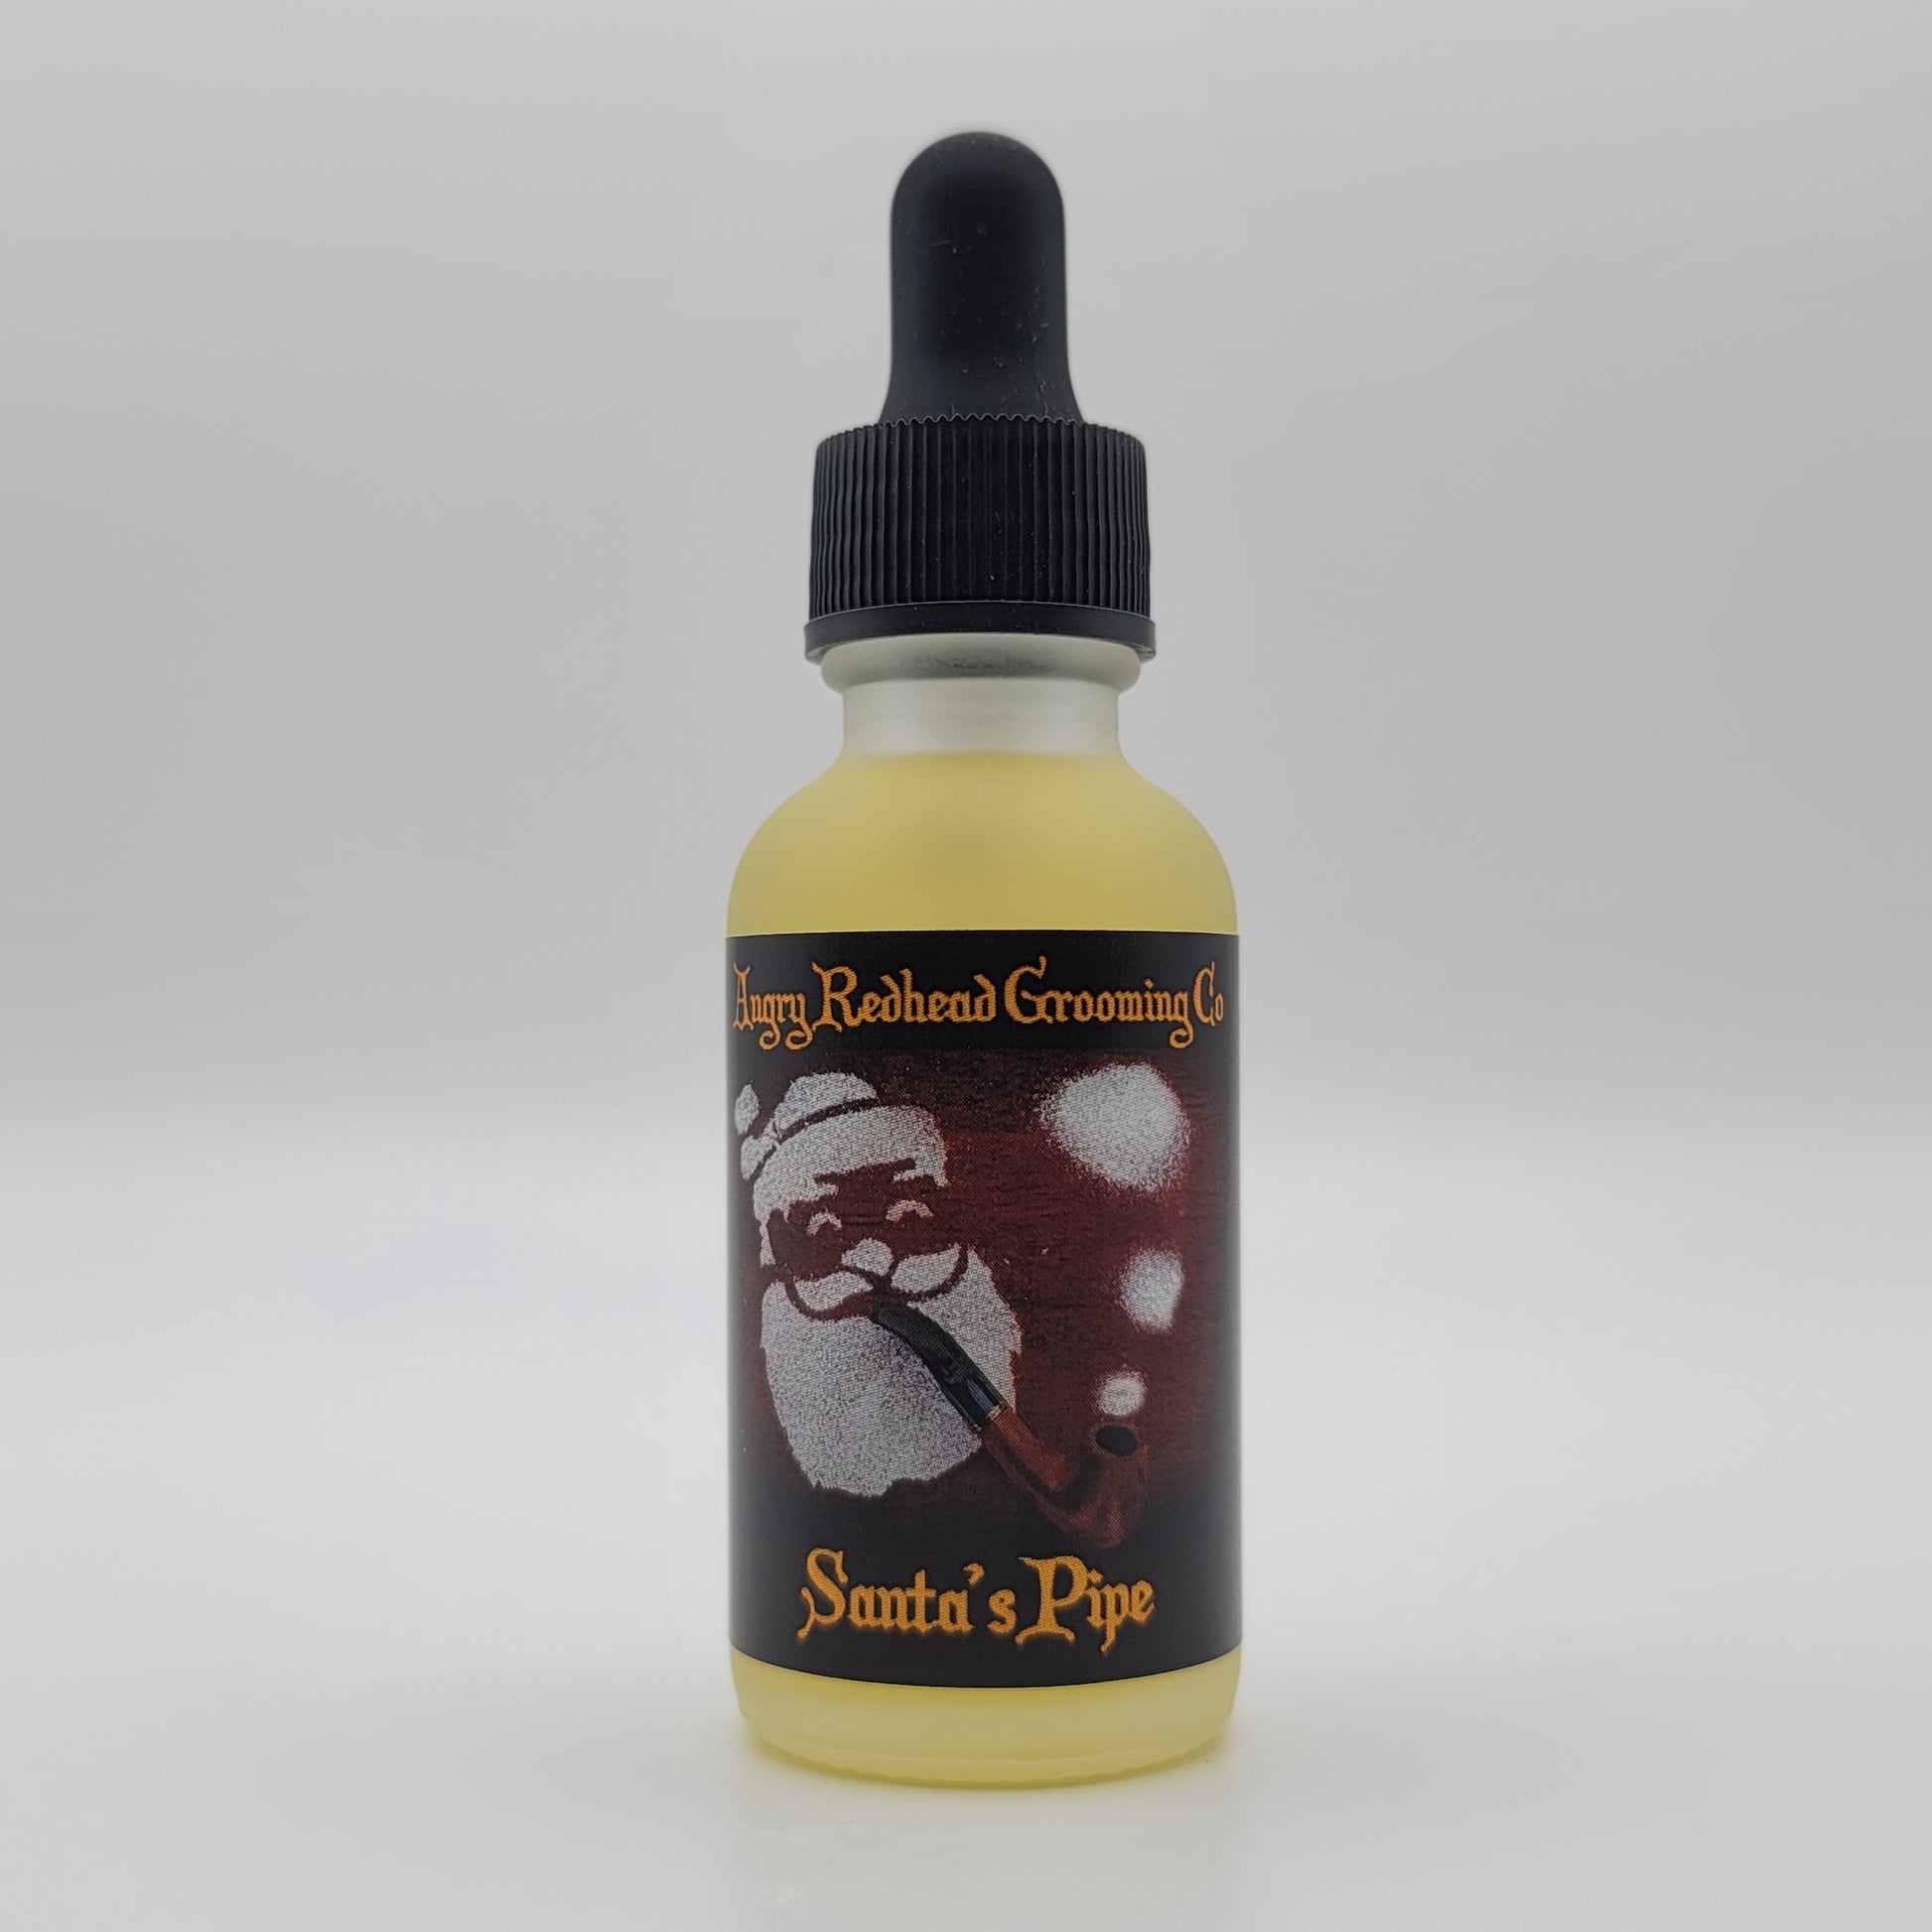 Santa's Pipe Pre-Shave Oil by Angry Redhead Grooming Co - angryredheadgrooming.com